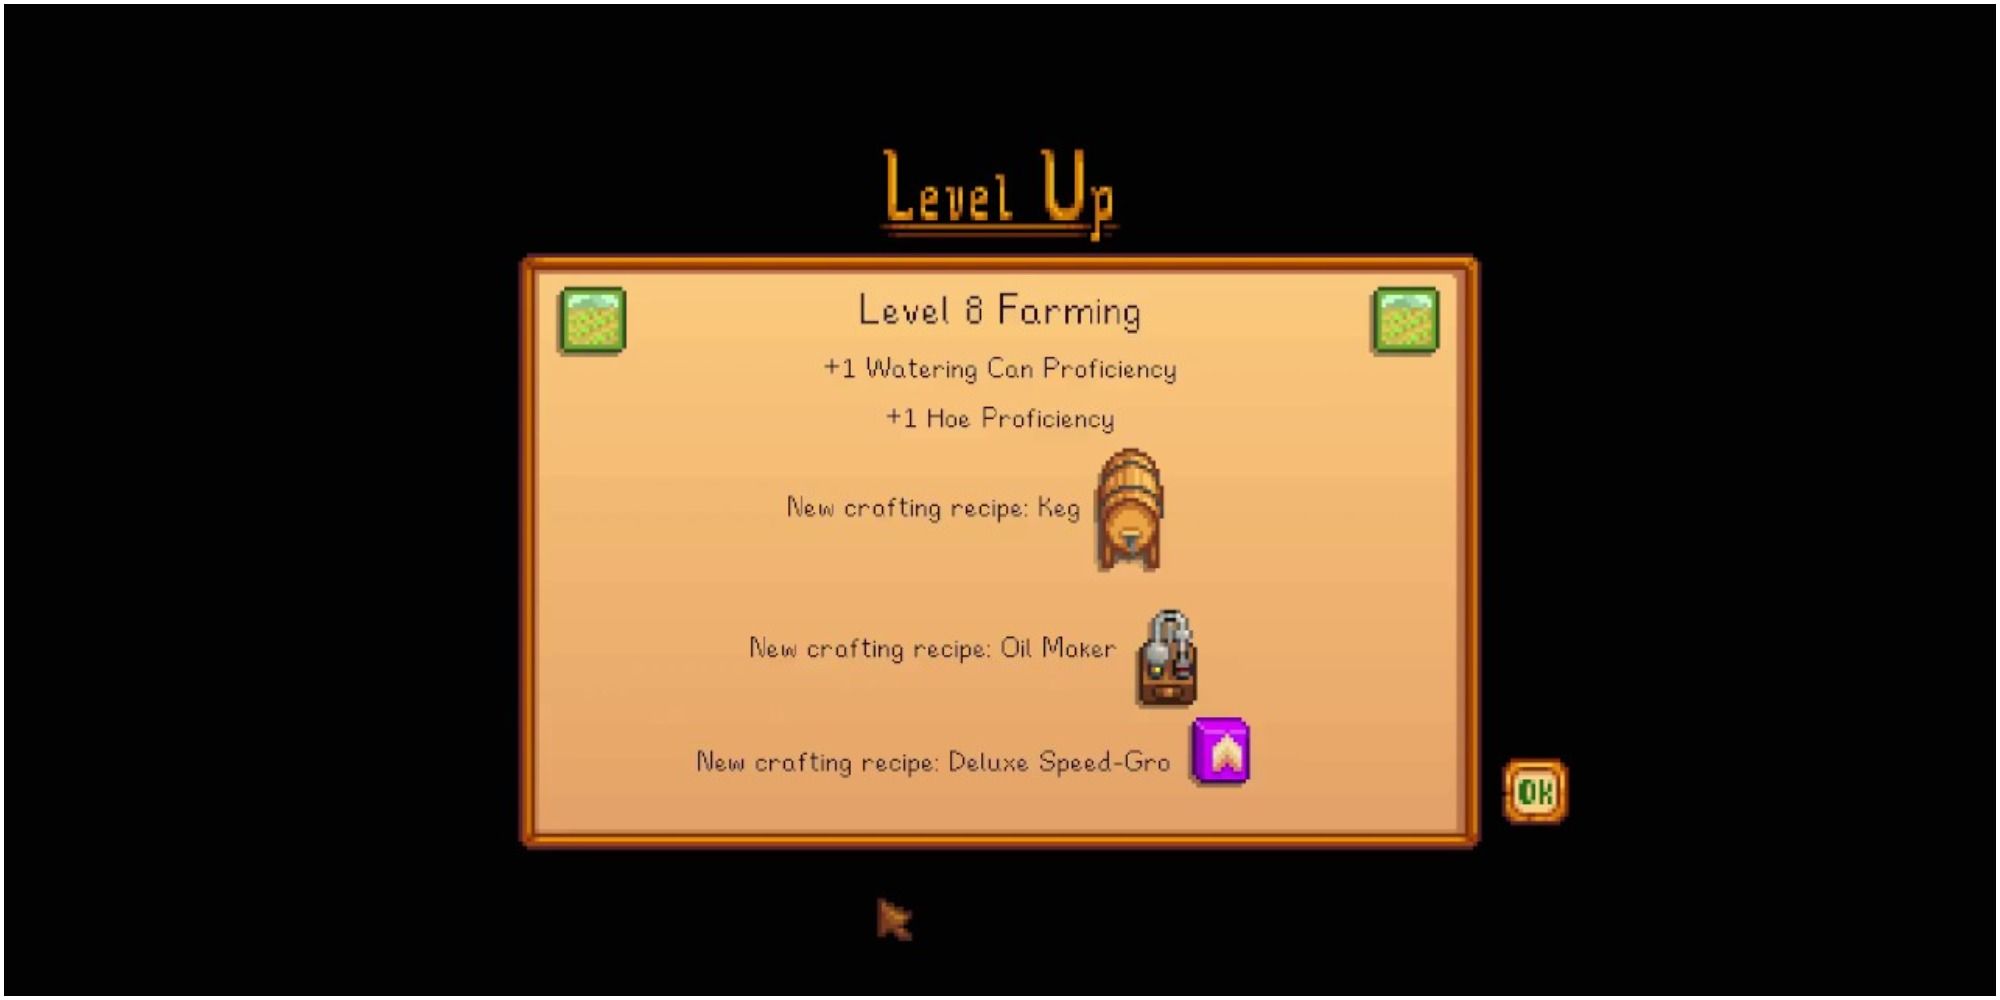 Stardew Valley: An image of the Farming Level Eight level up screen.